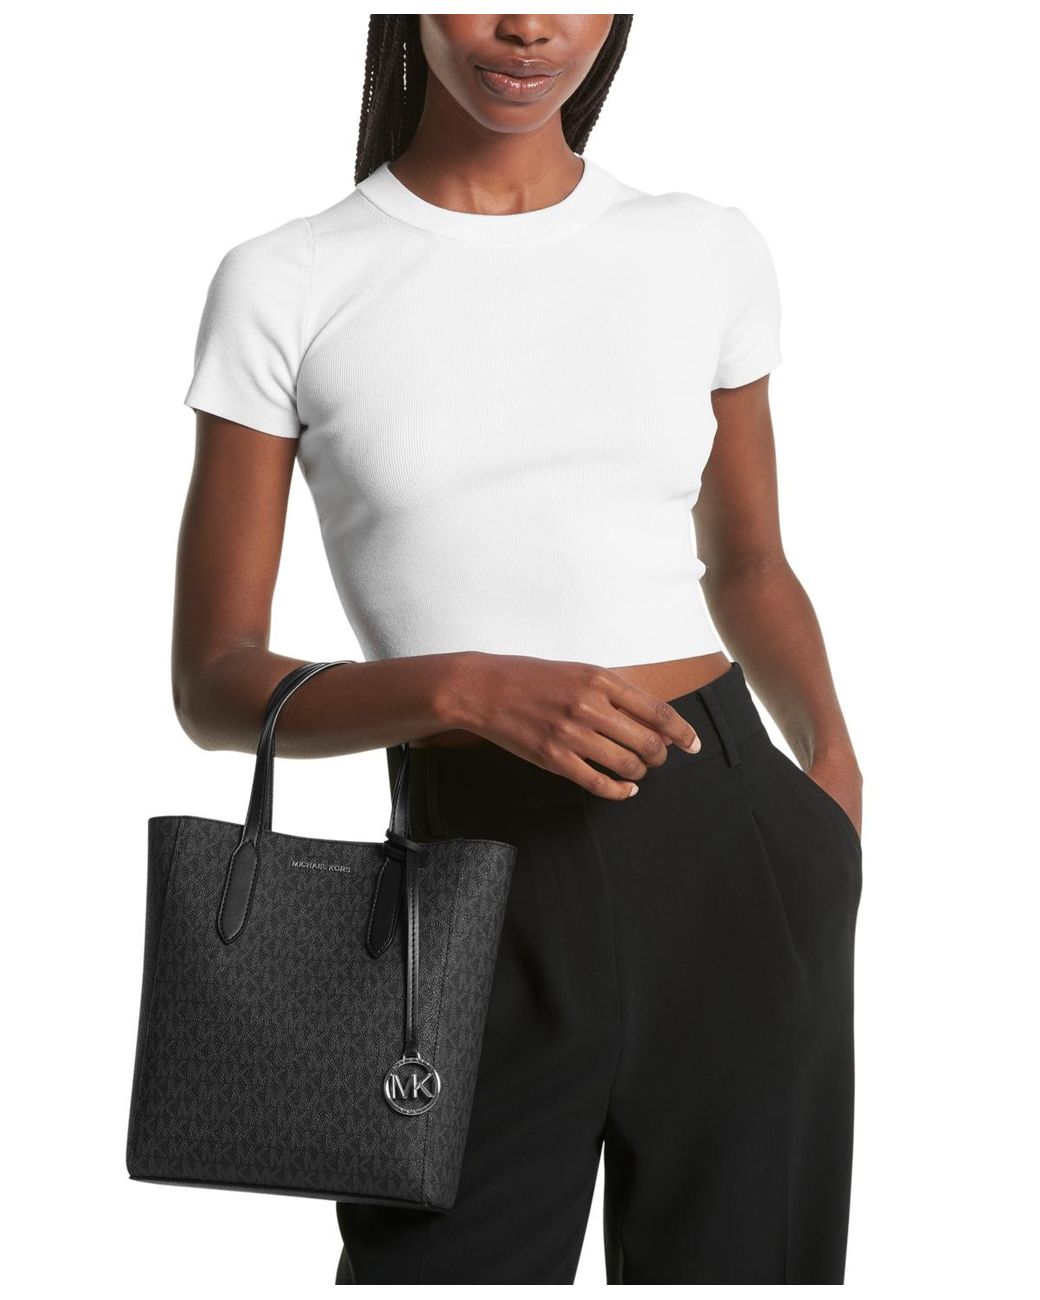  Michael Kors Eliza Large North/South Tote Clear One Size :  Clothing, Shoes & Jewelry